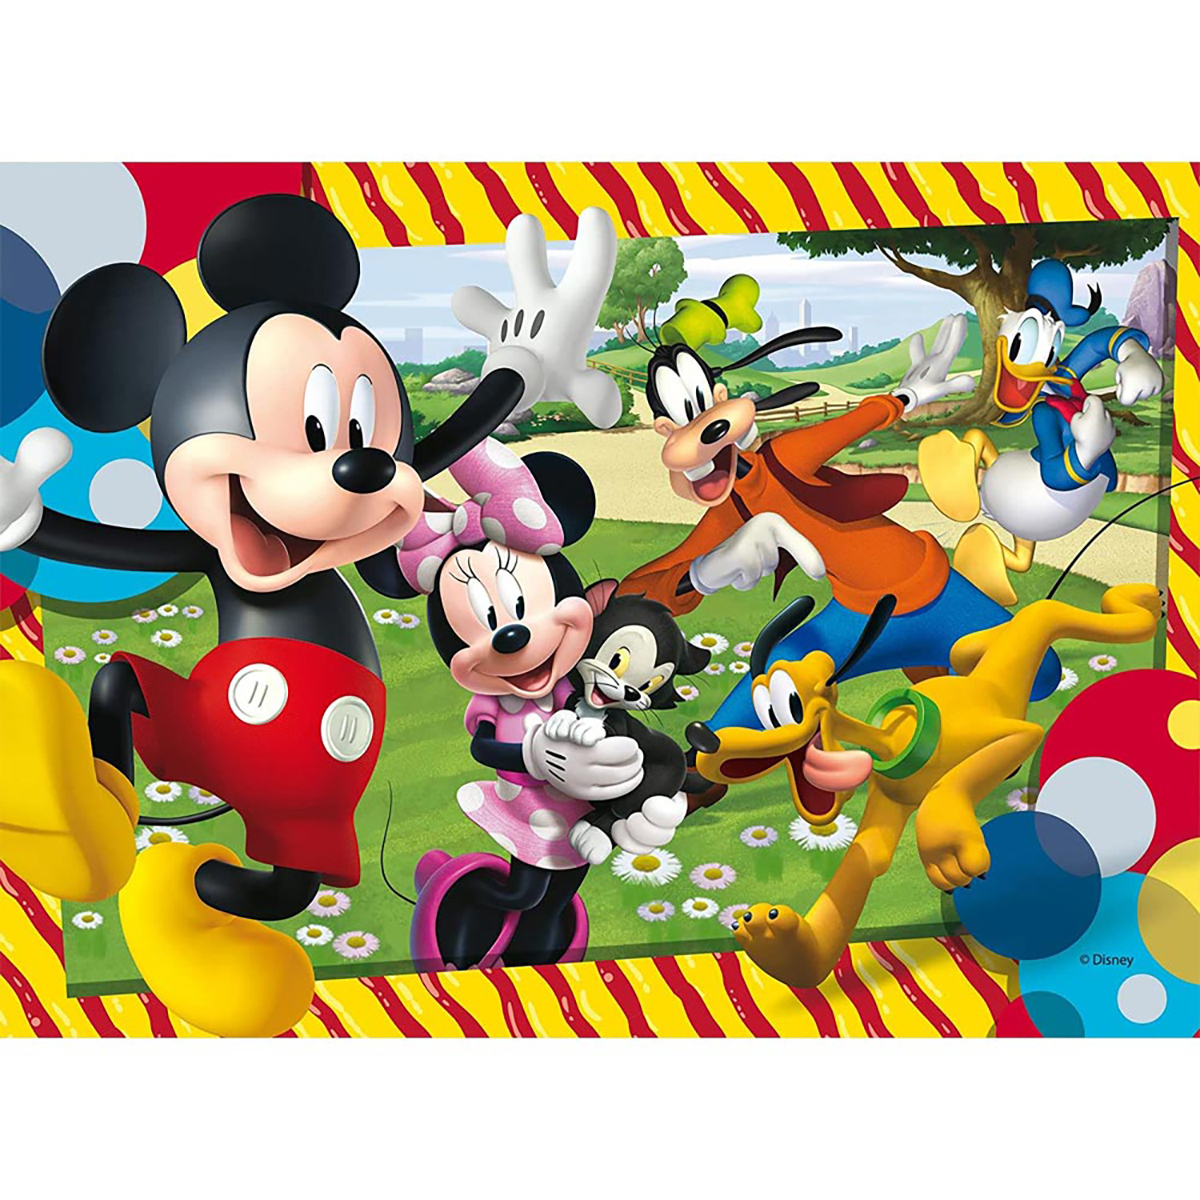 MICKEY MOUSE ECO-Ausmal-Puzzle Boden 60 von Teile, Micky Lisciani Puzzle Maus